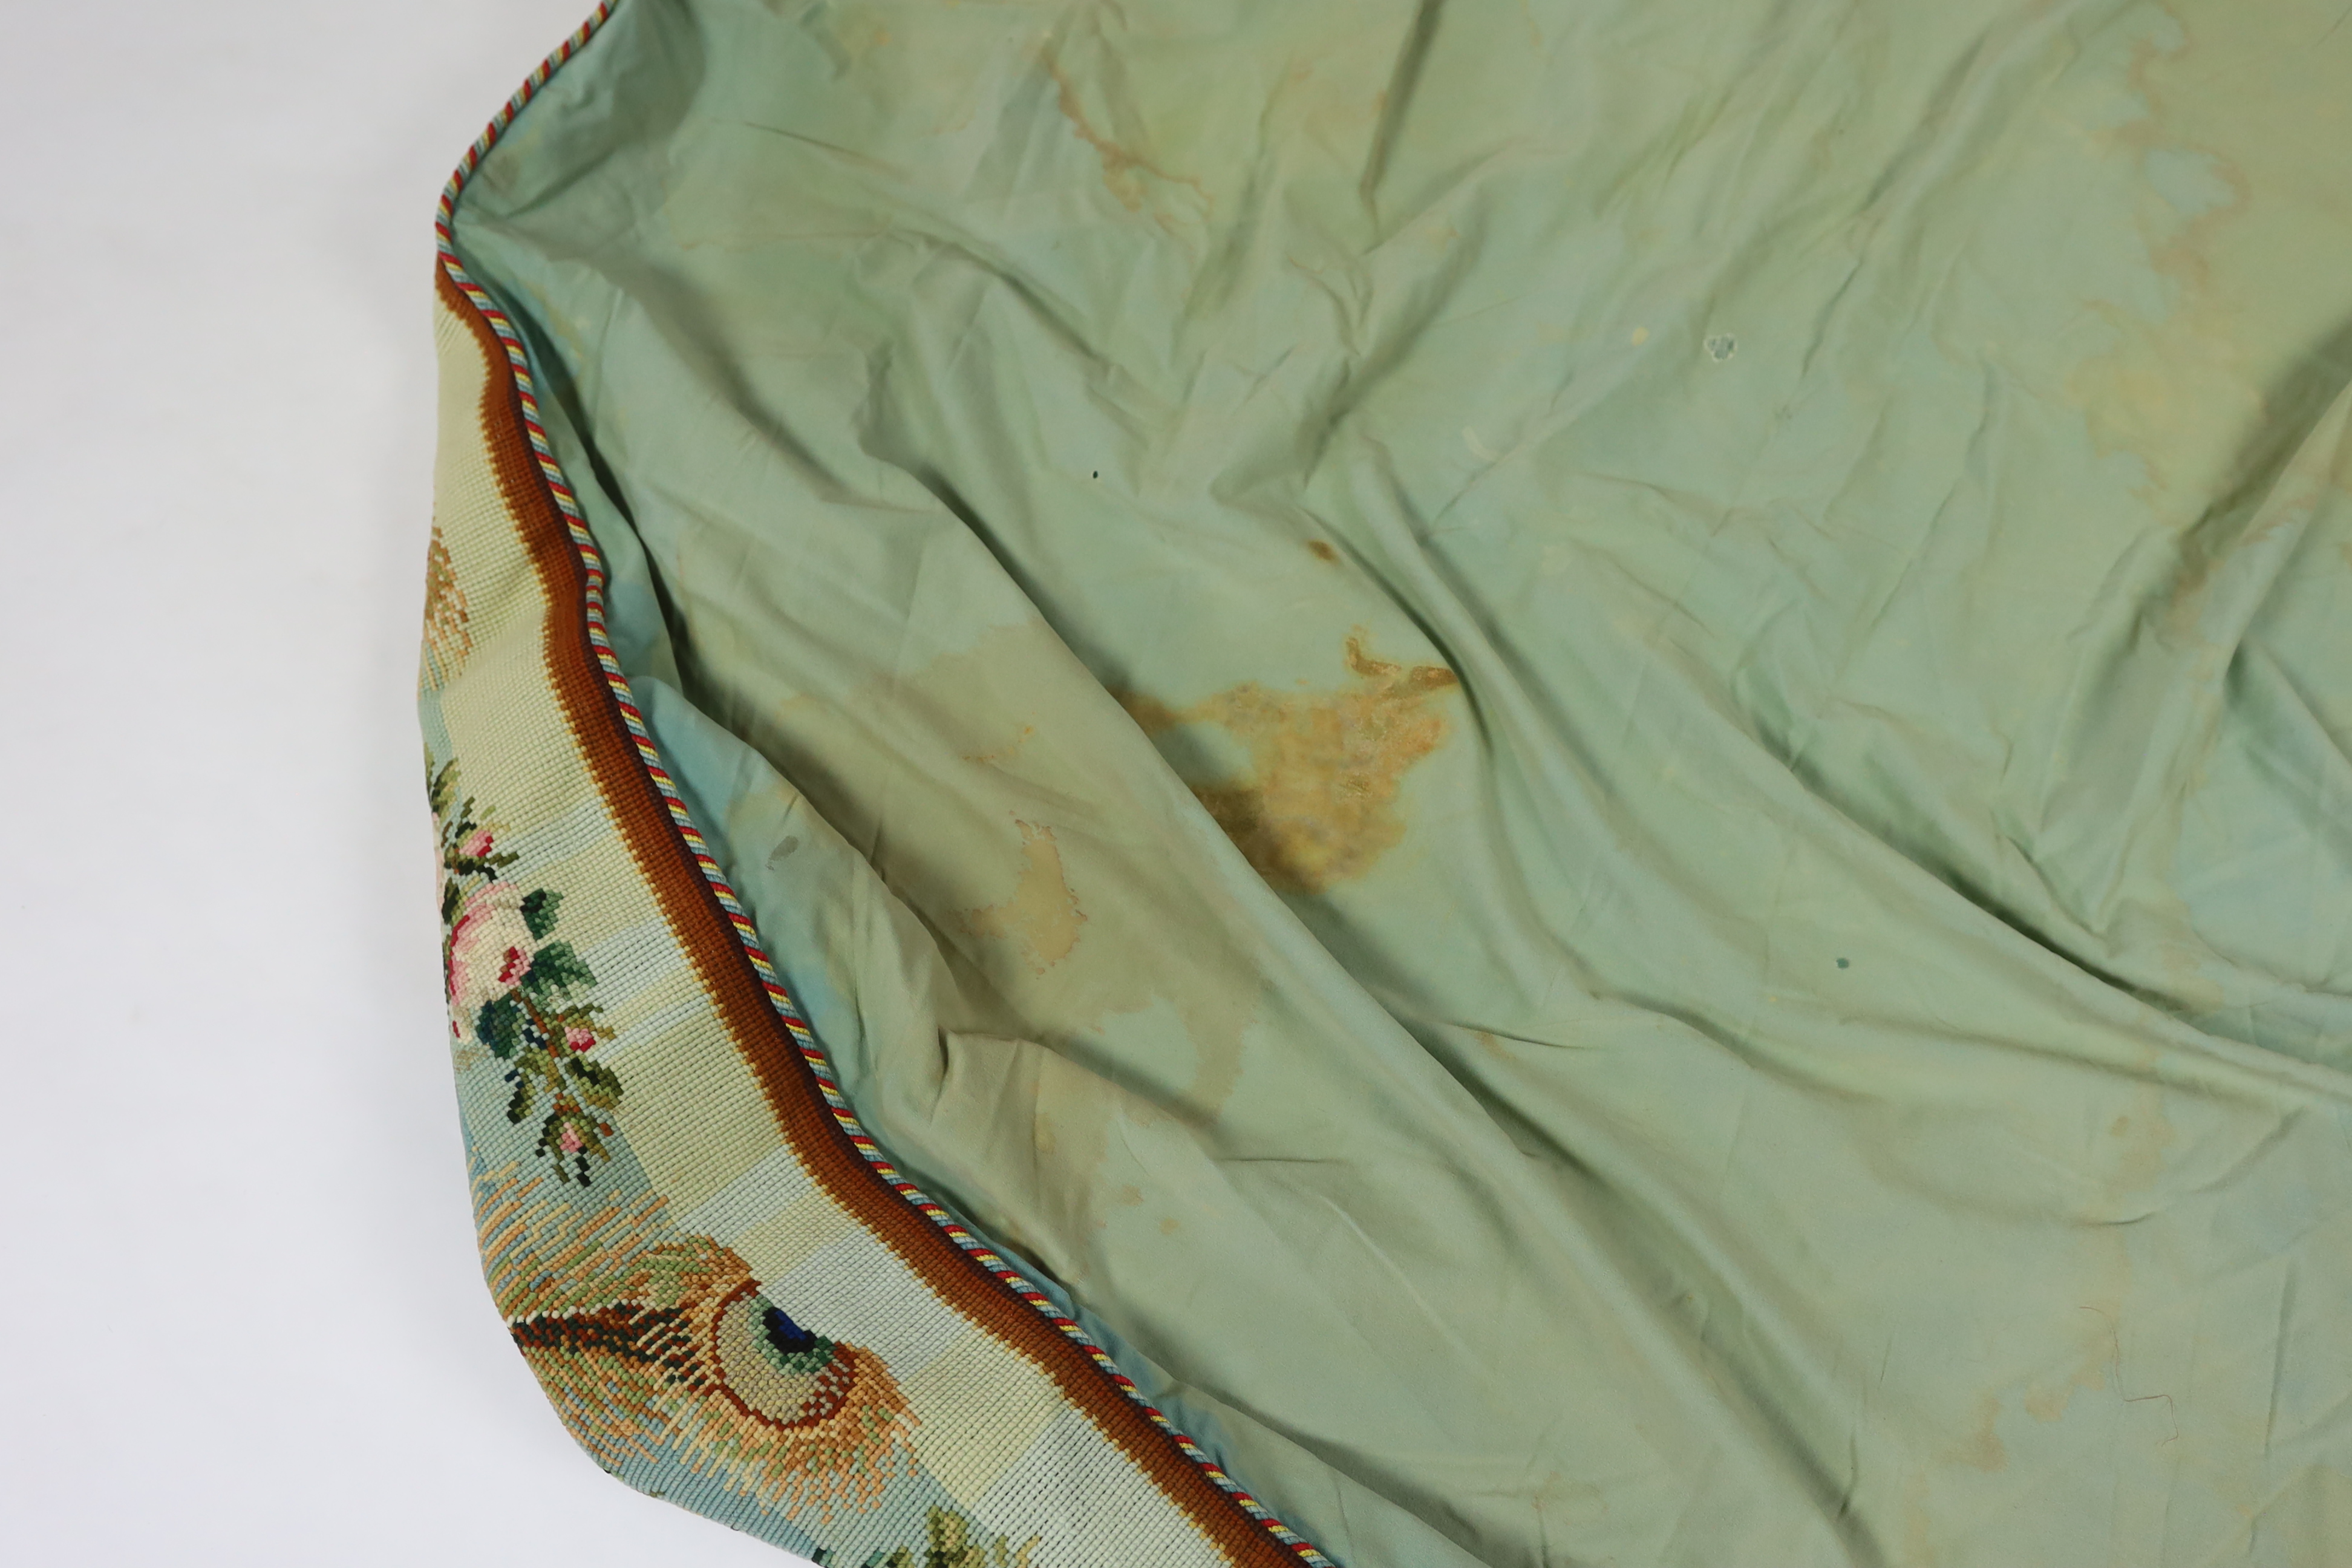 A 19th century Berlin hand wool worked floral and peacock feather designed border, with a deep fringe and cording along the top edge, used as the outer edge/border to a plain cotton turquoise table cover, the wool work a